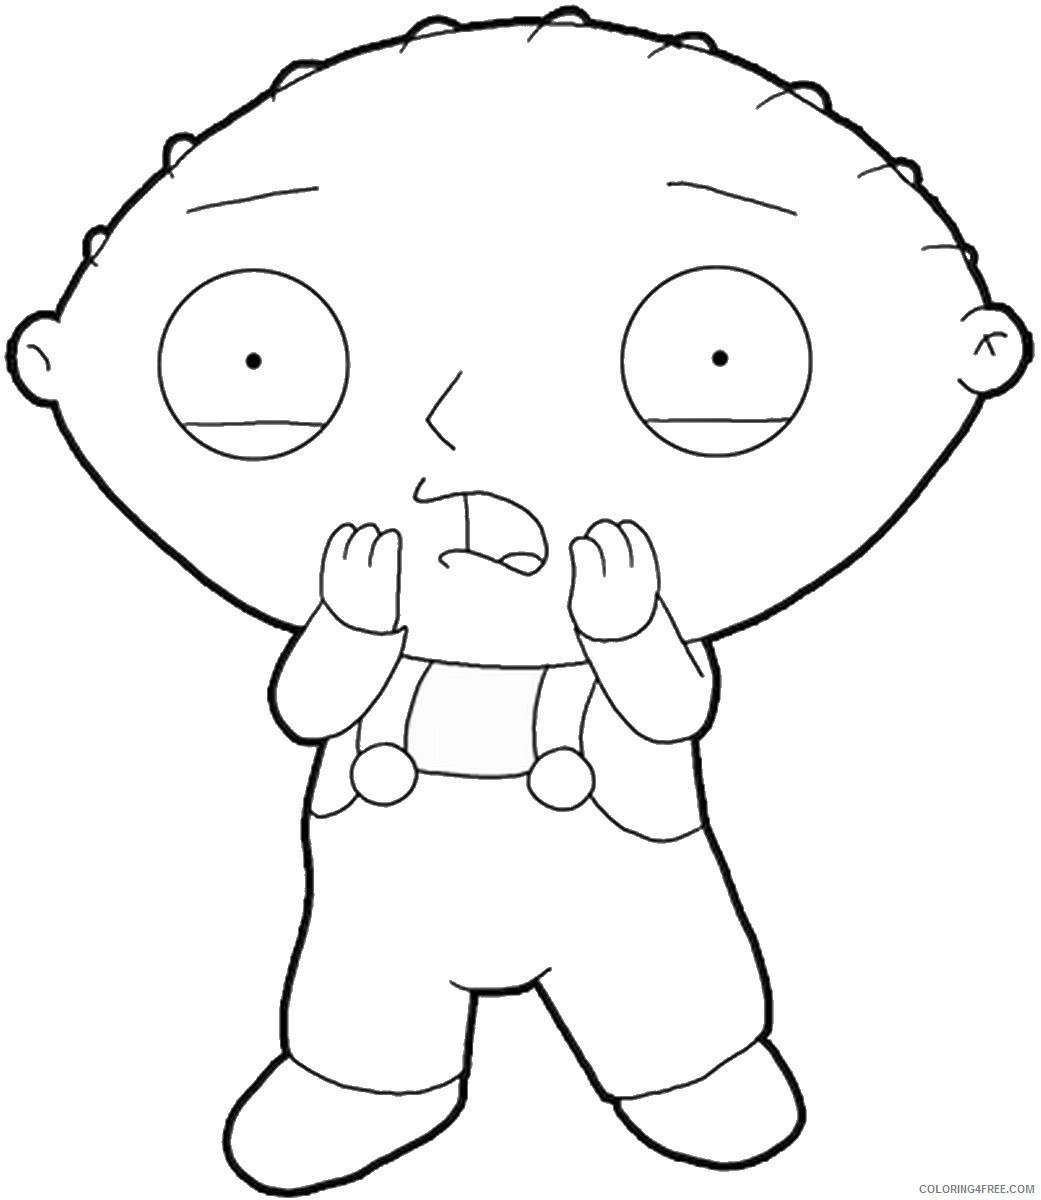 Family Guy Coloring Pages Cartoons family_guy_cl_05 Printable 2020 2721 Coloring4free